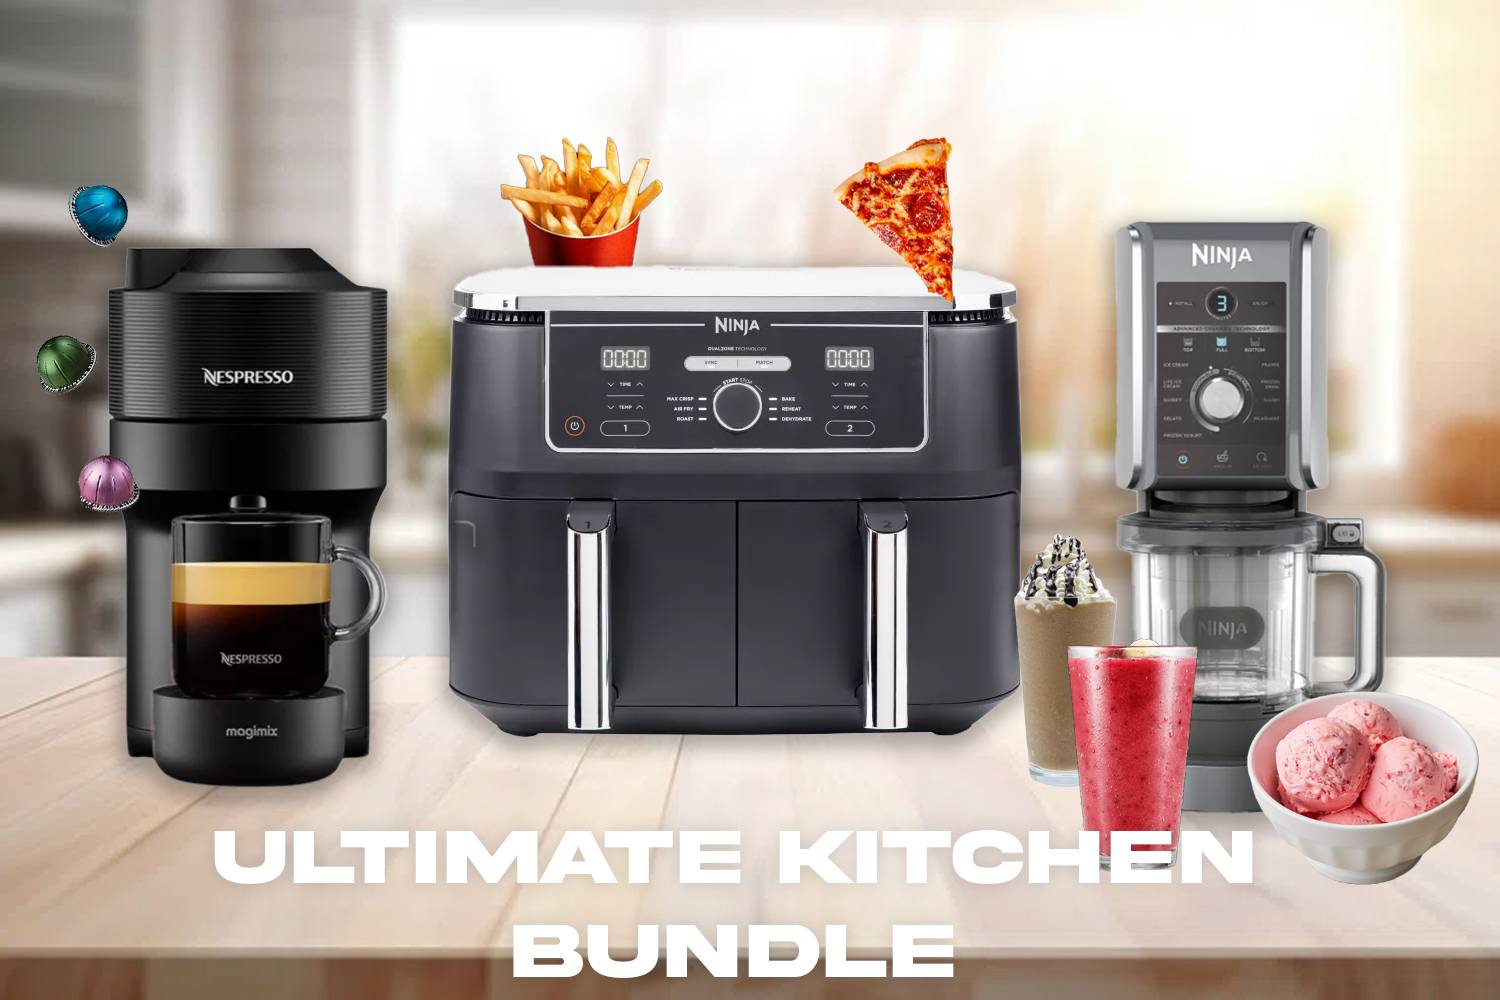 Win this Ultimate Kitchen Bundle